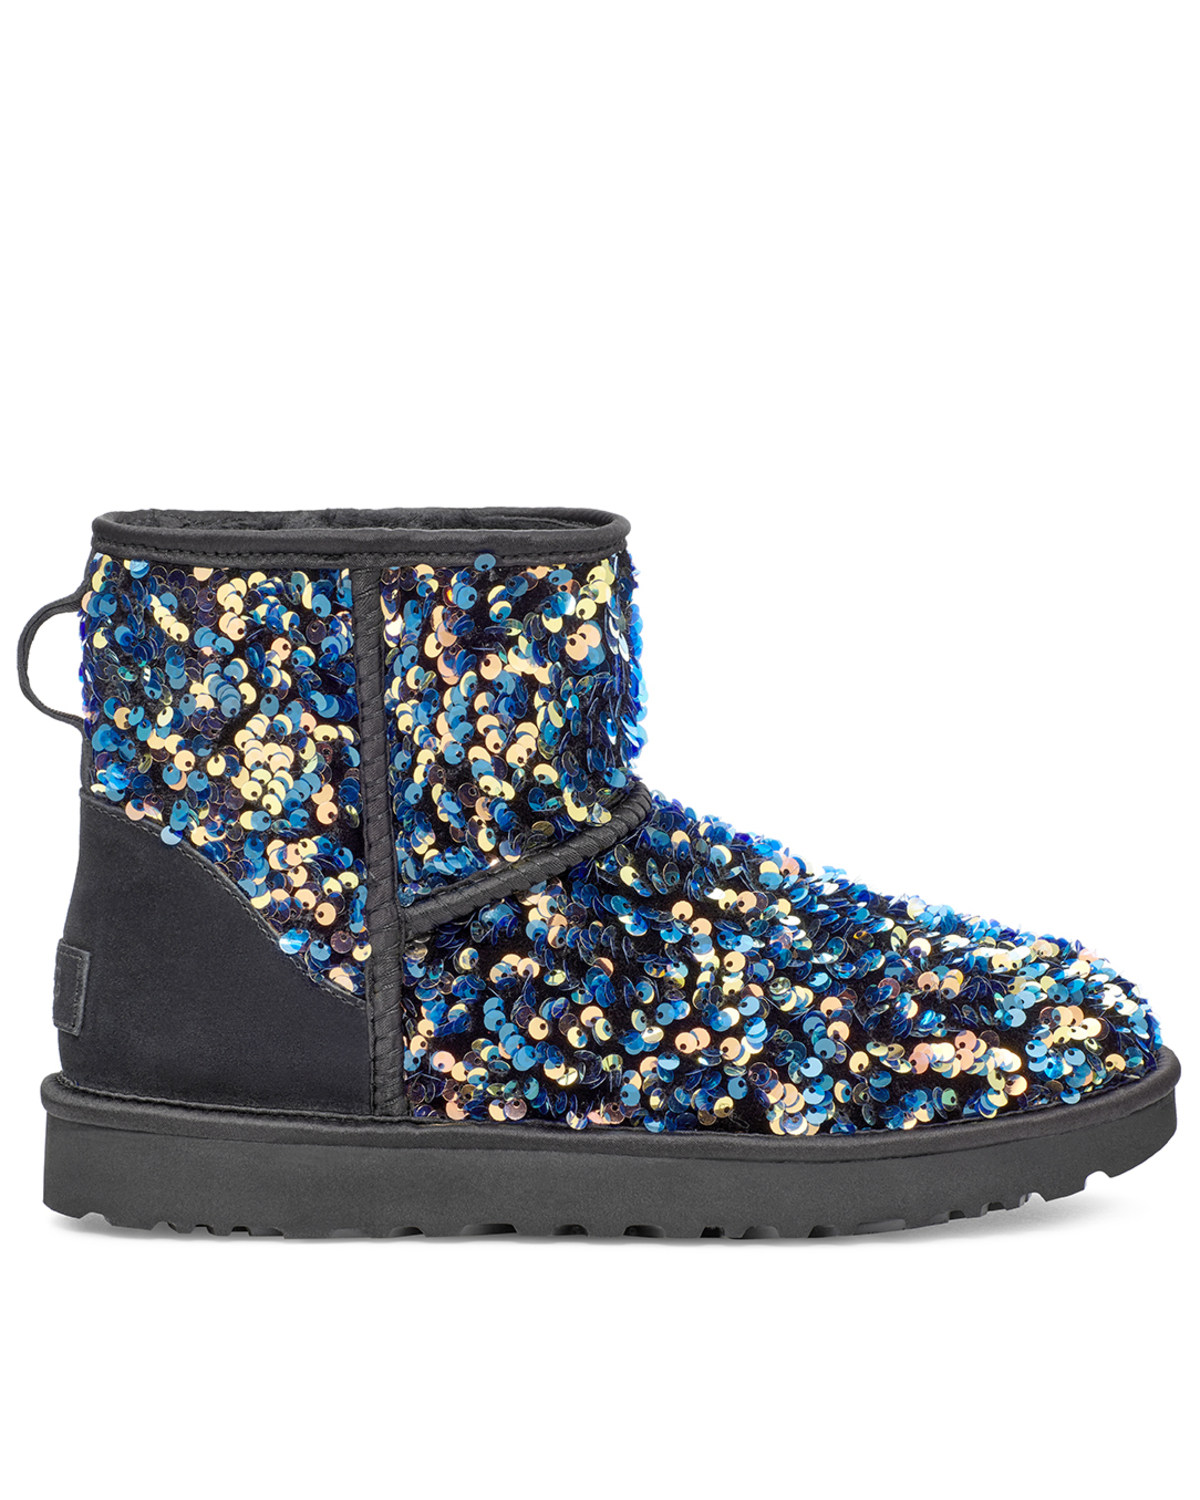 classic ugg sparkle boots